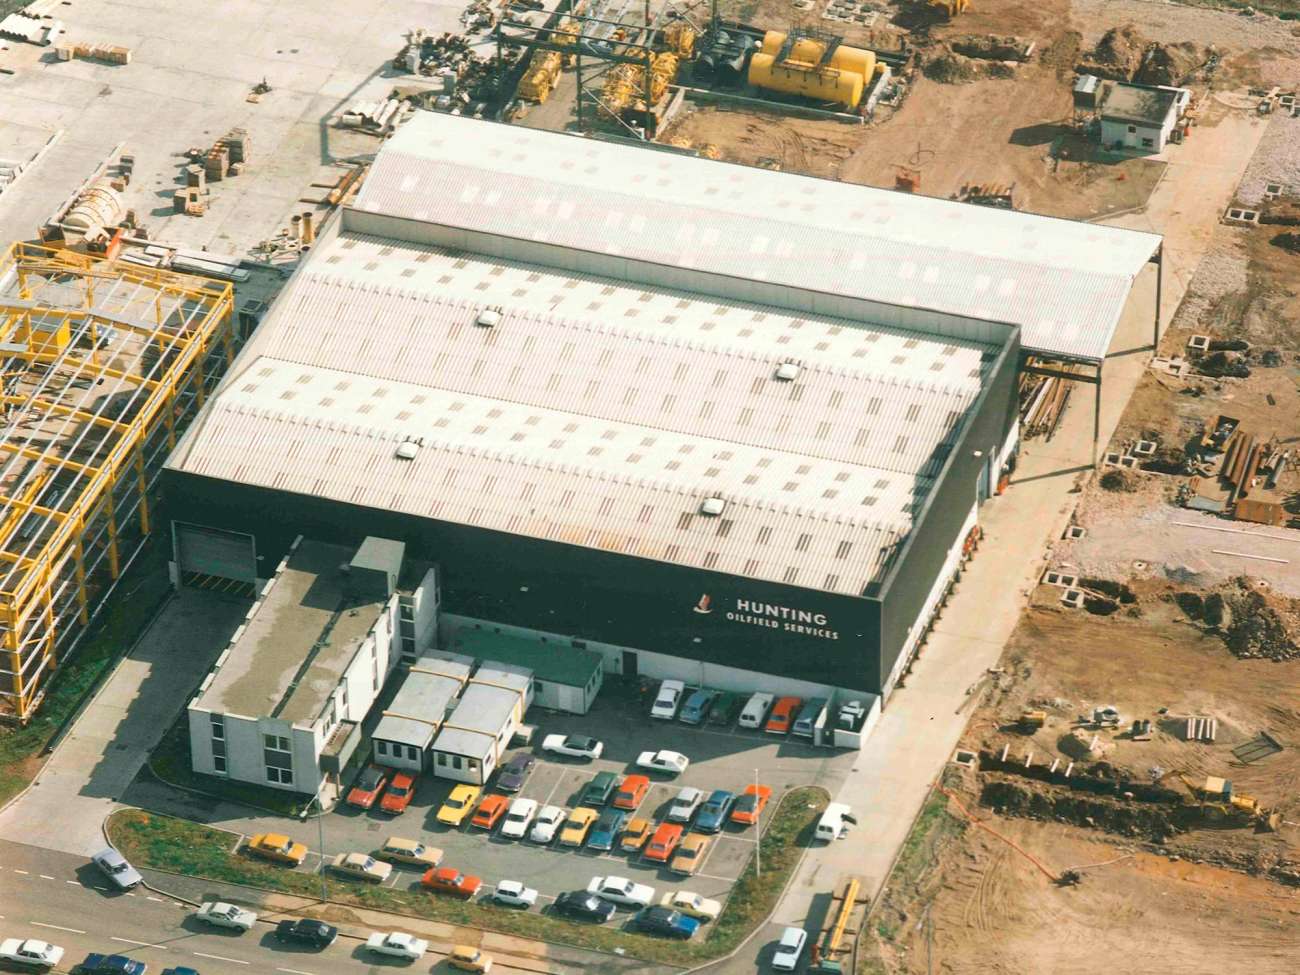 Hunting owned industrial facility in Altens, Aberdeen, UK